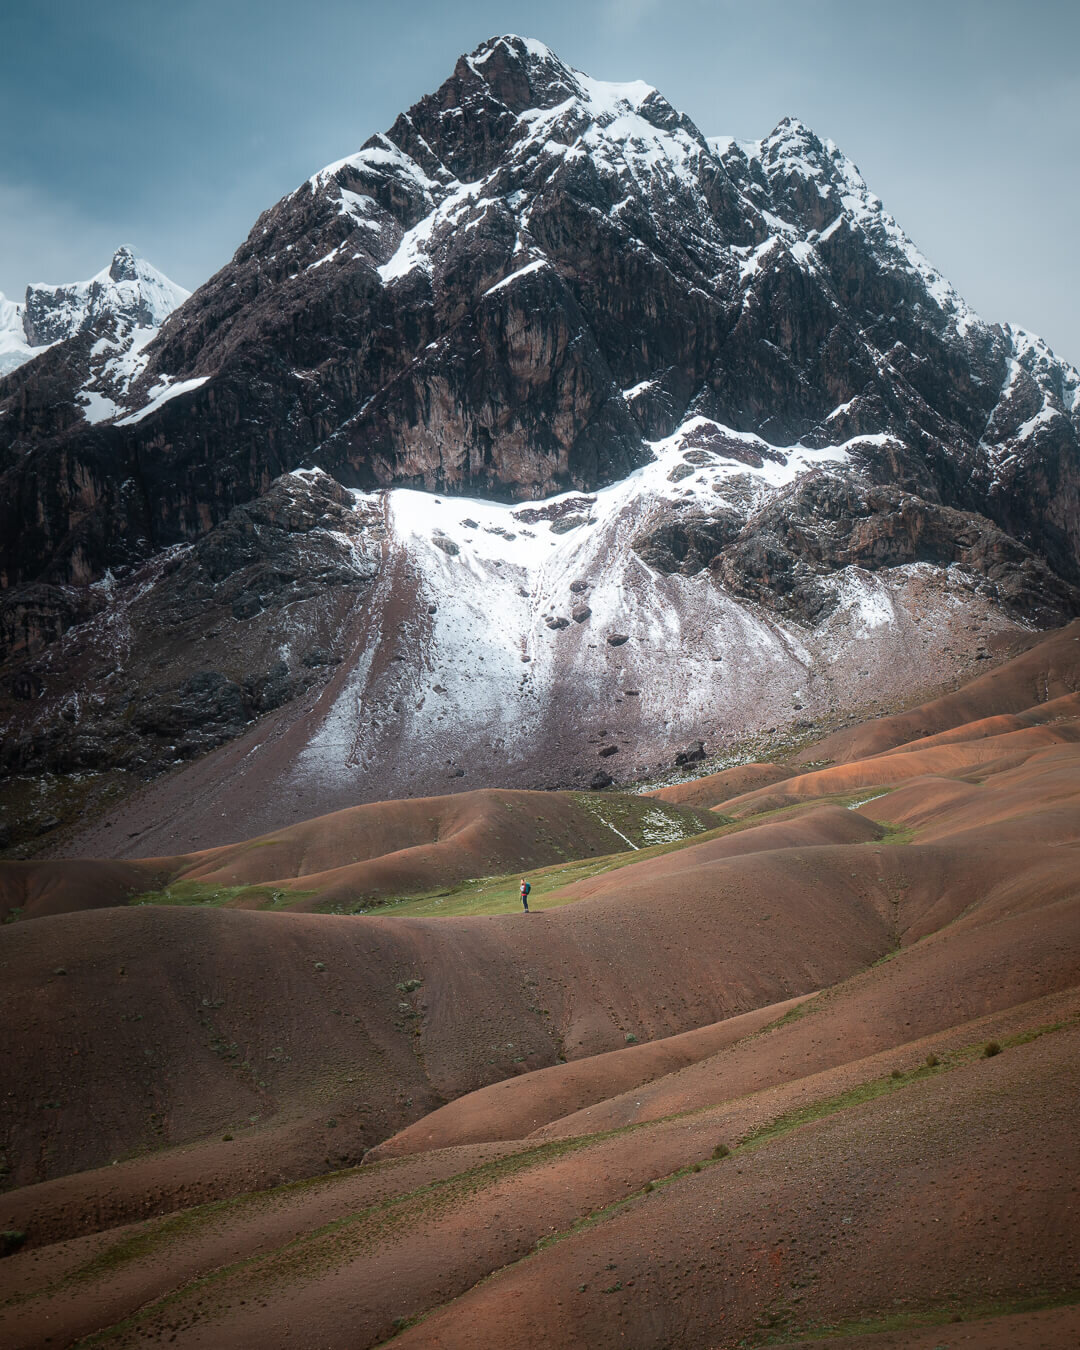 Mountain views on the second day of the Ausangate Trek in Peru.